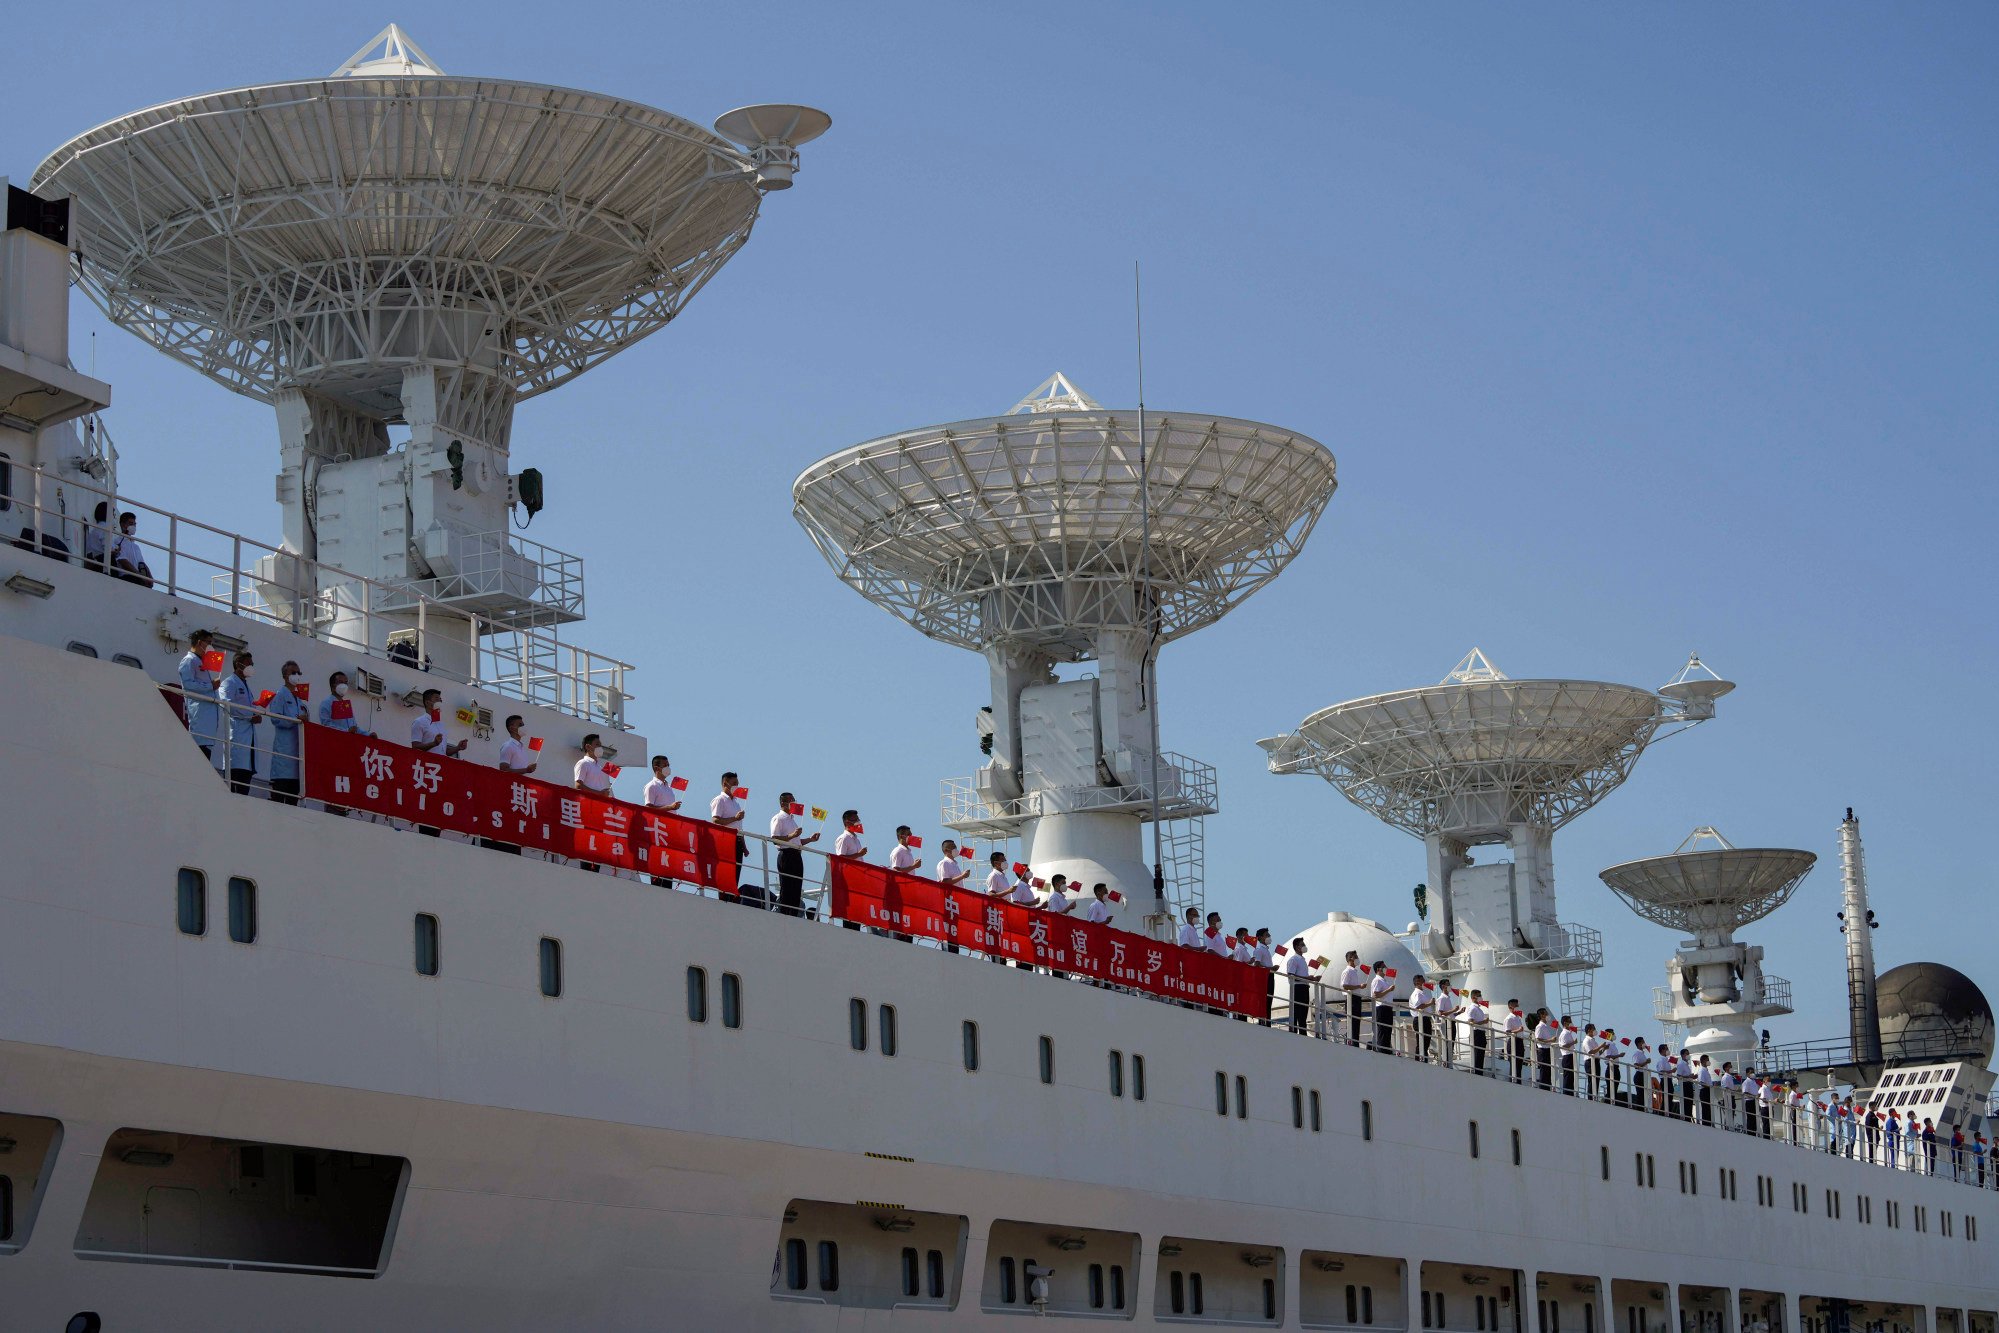 The tracking ship, equipped with satellite dishes and radar systems, can monitor the status of a rocket launch and instruct a spacecraft to change its orbit or unfurl its solar panels in space. Photo: AP